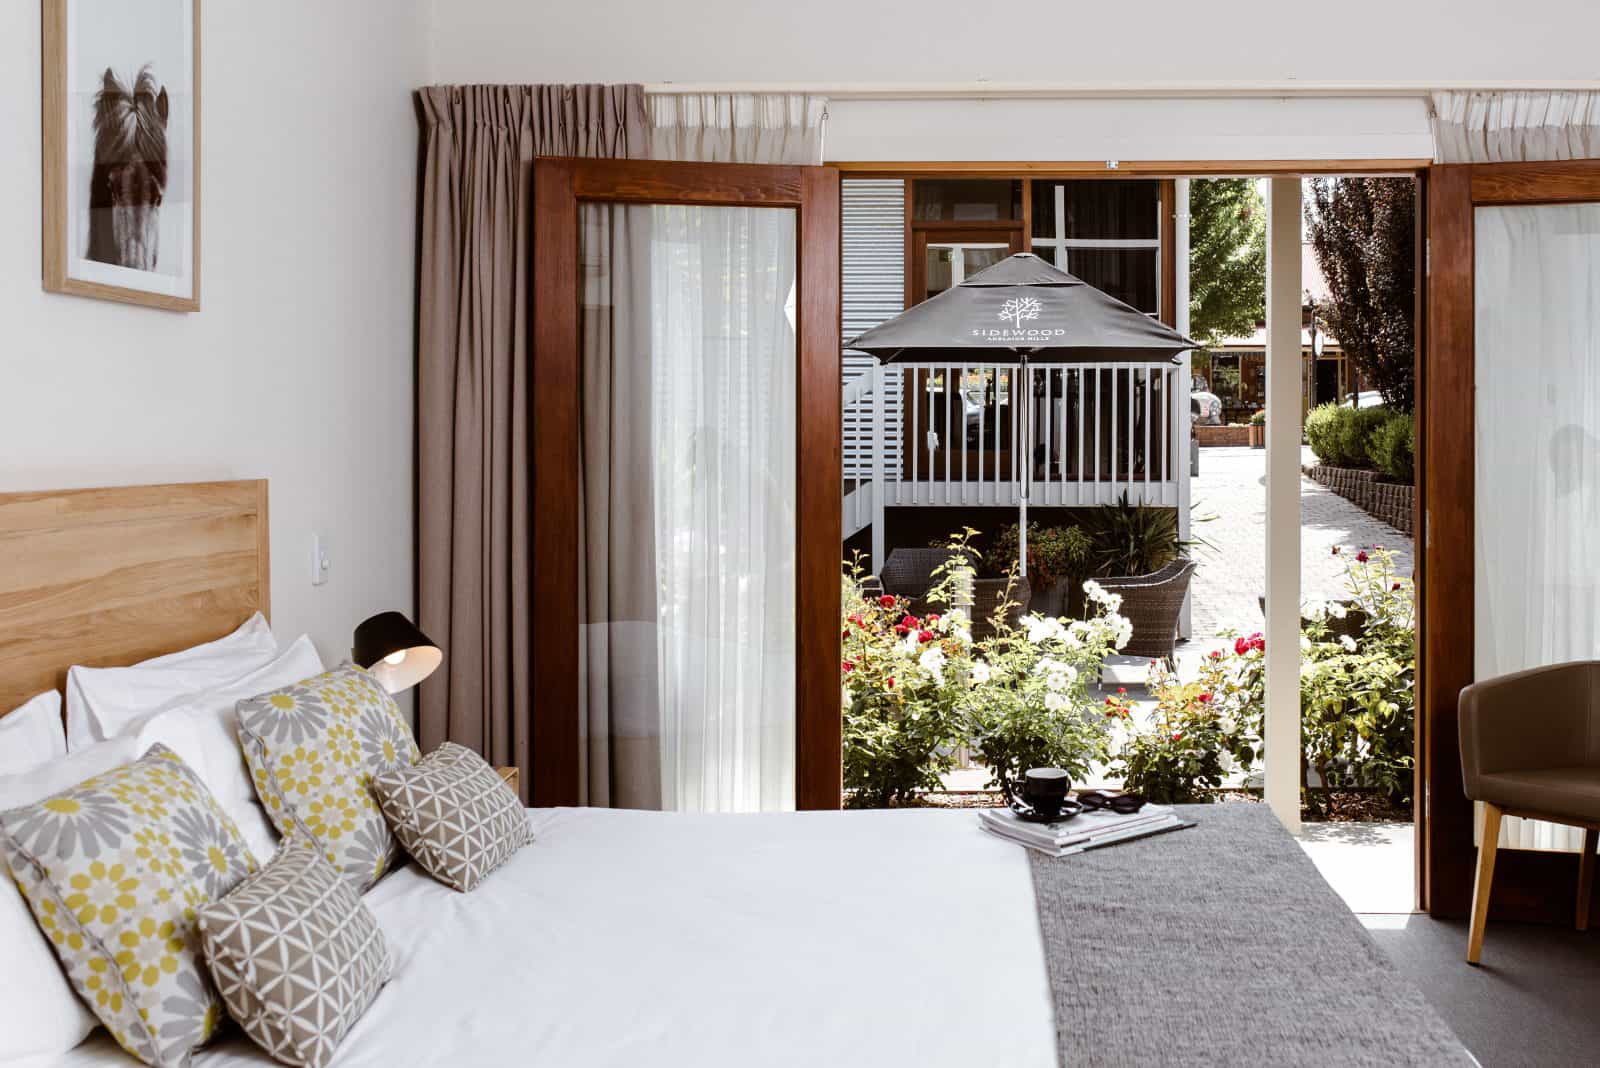 A king-sized bed with Scandinavian-style furnishings, overlooking a garden